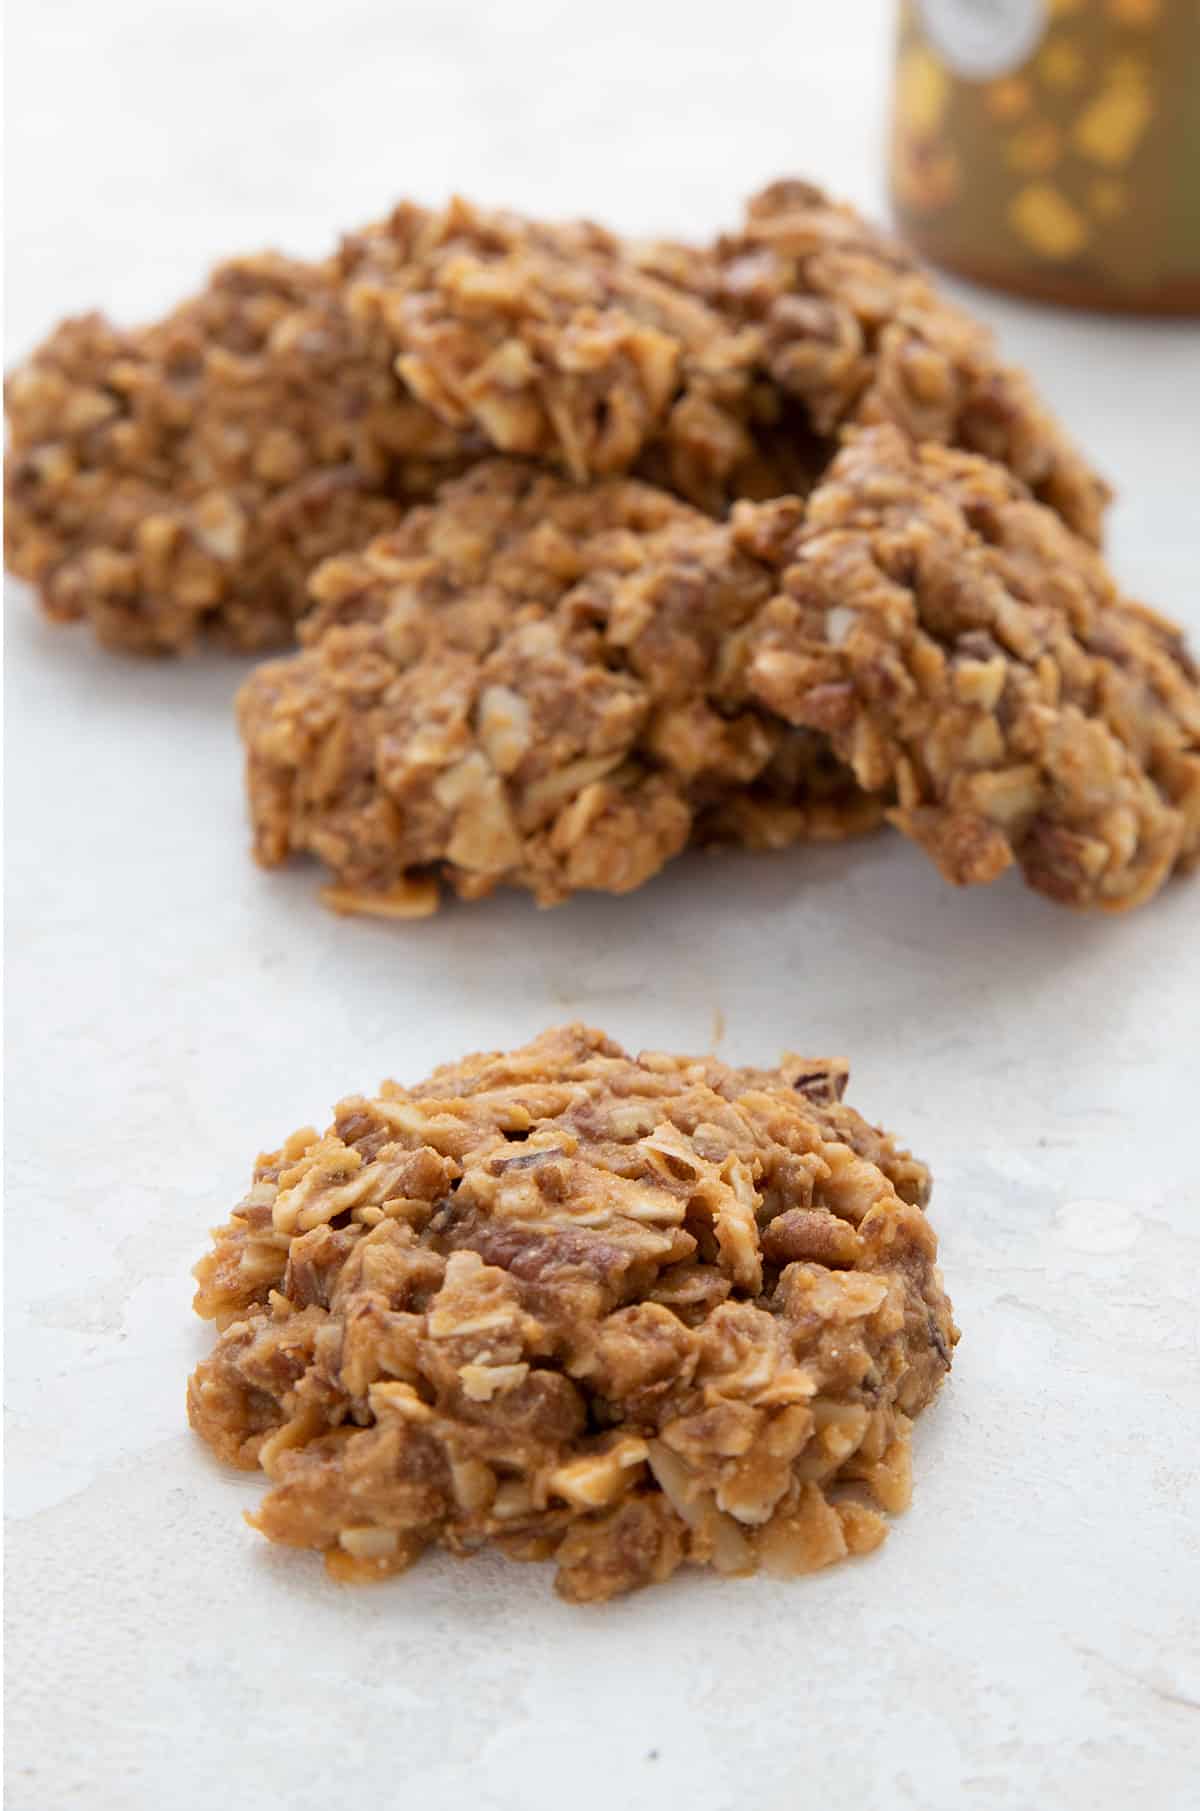 A Keto No Bake Cookie in front of a pile of more keto cookies.